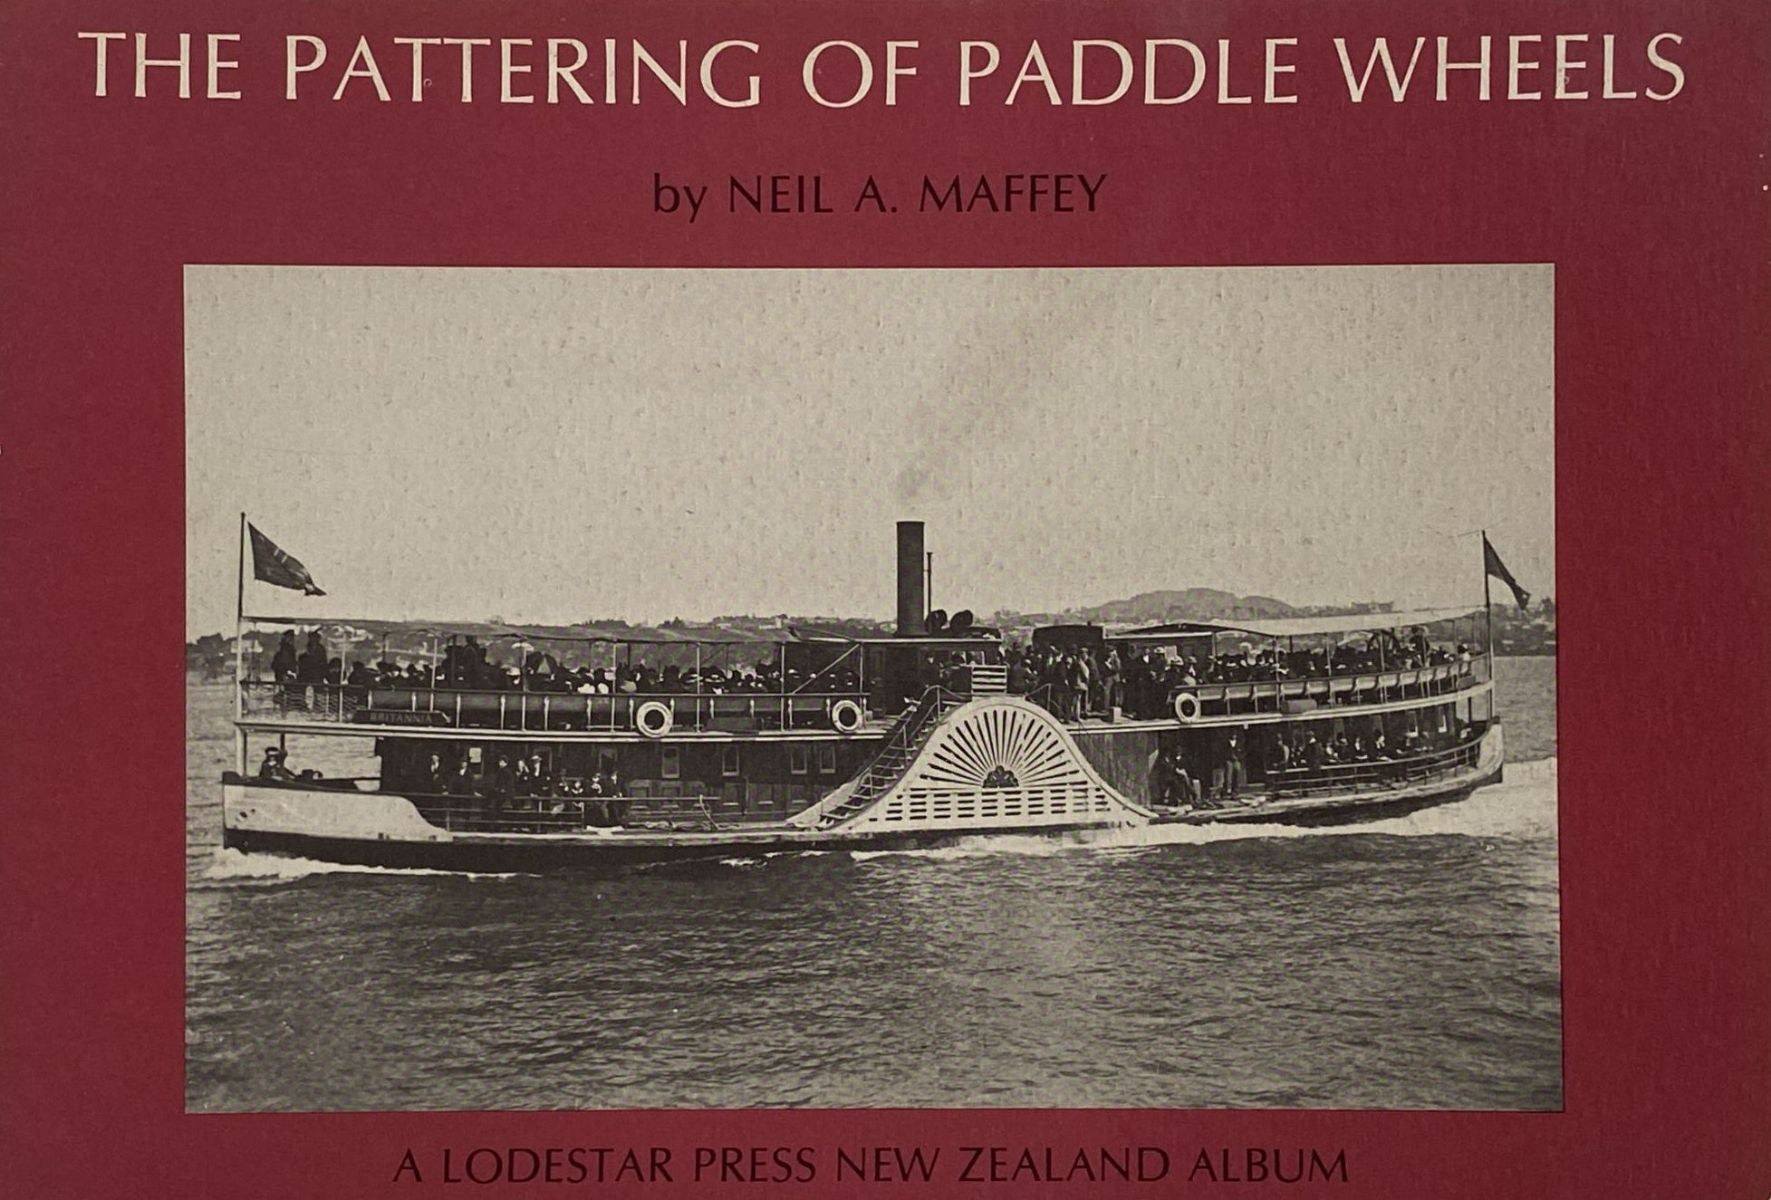 THE PATTERING OF PADDLE WHEELS